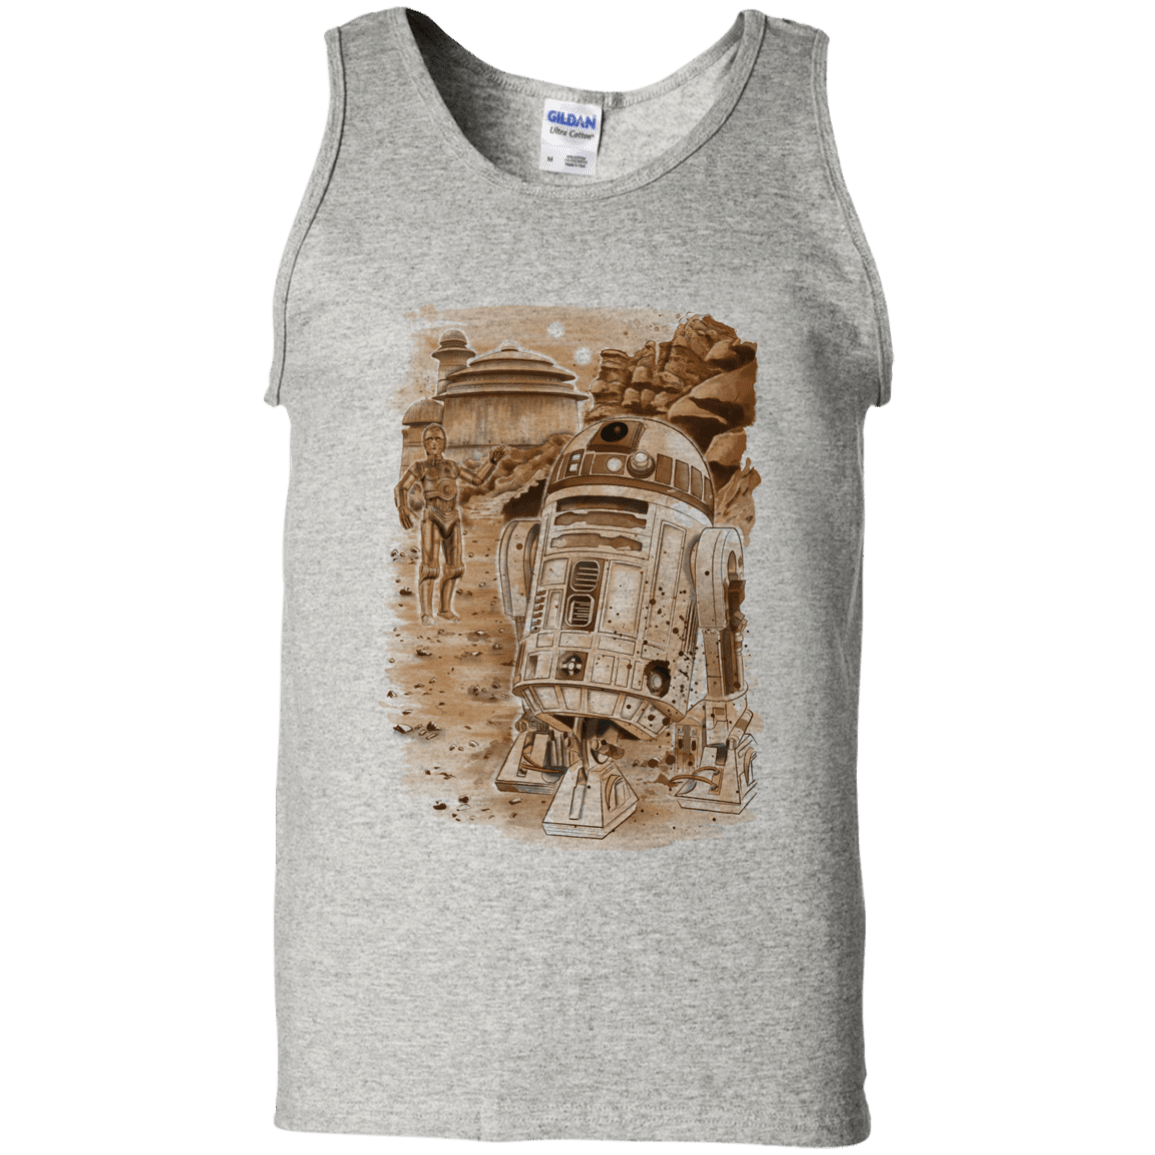 Mission to jabba palace Men's Tank Top